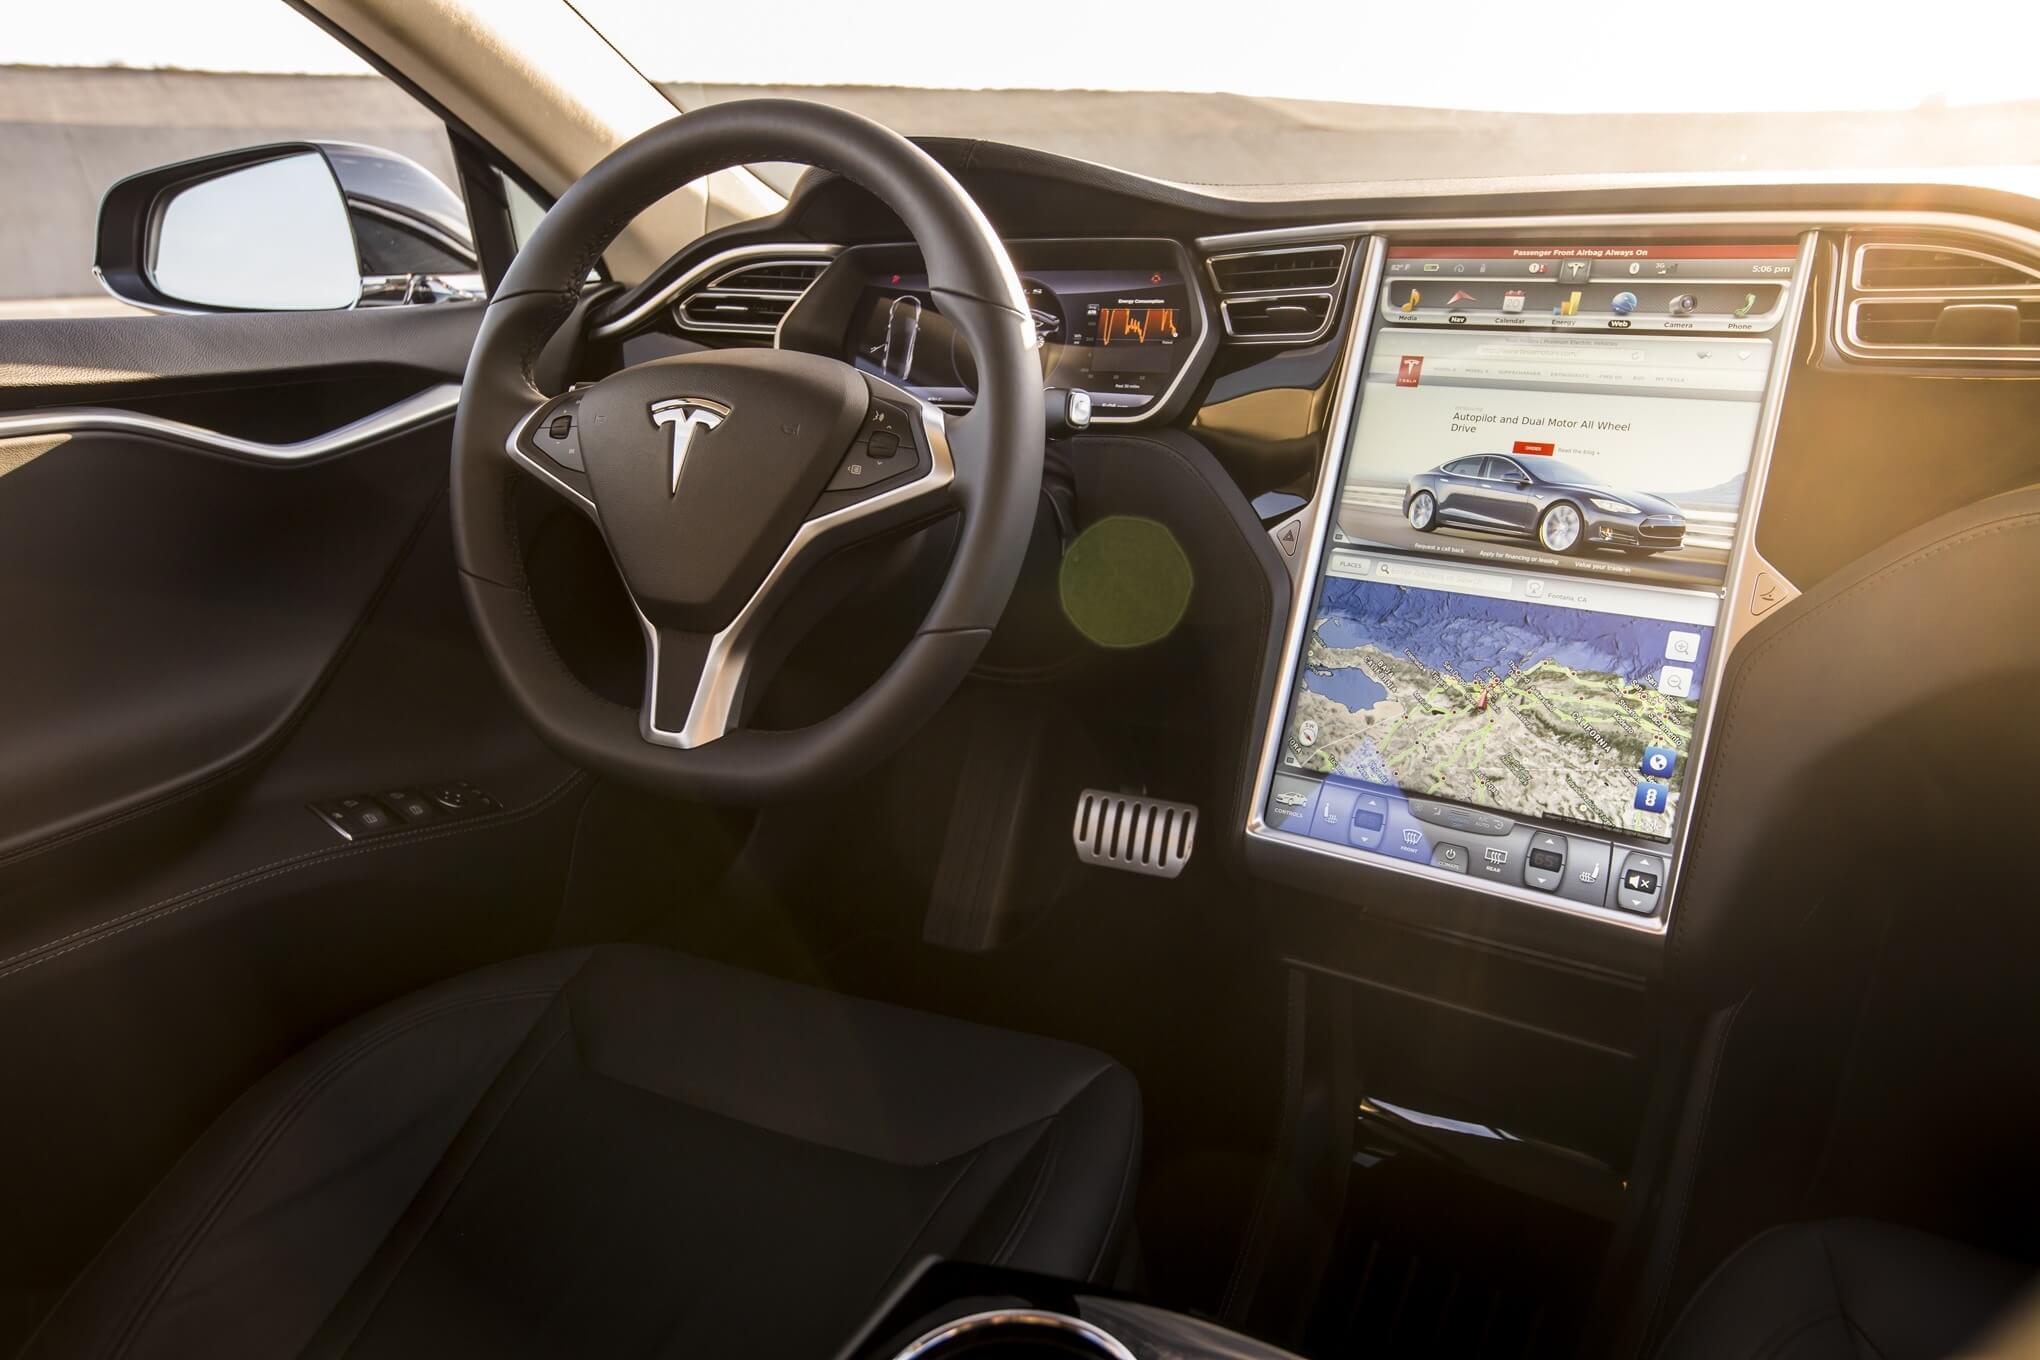 tesla expands to new market with model 3 the daily gazette with regard to 2015 tesla model s interior